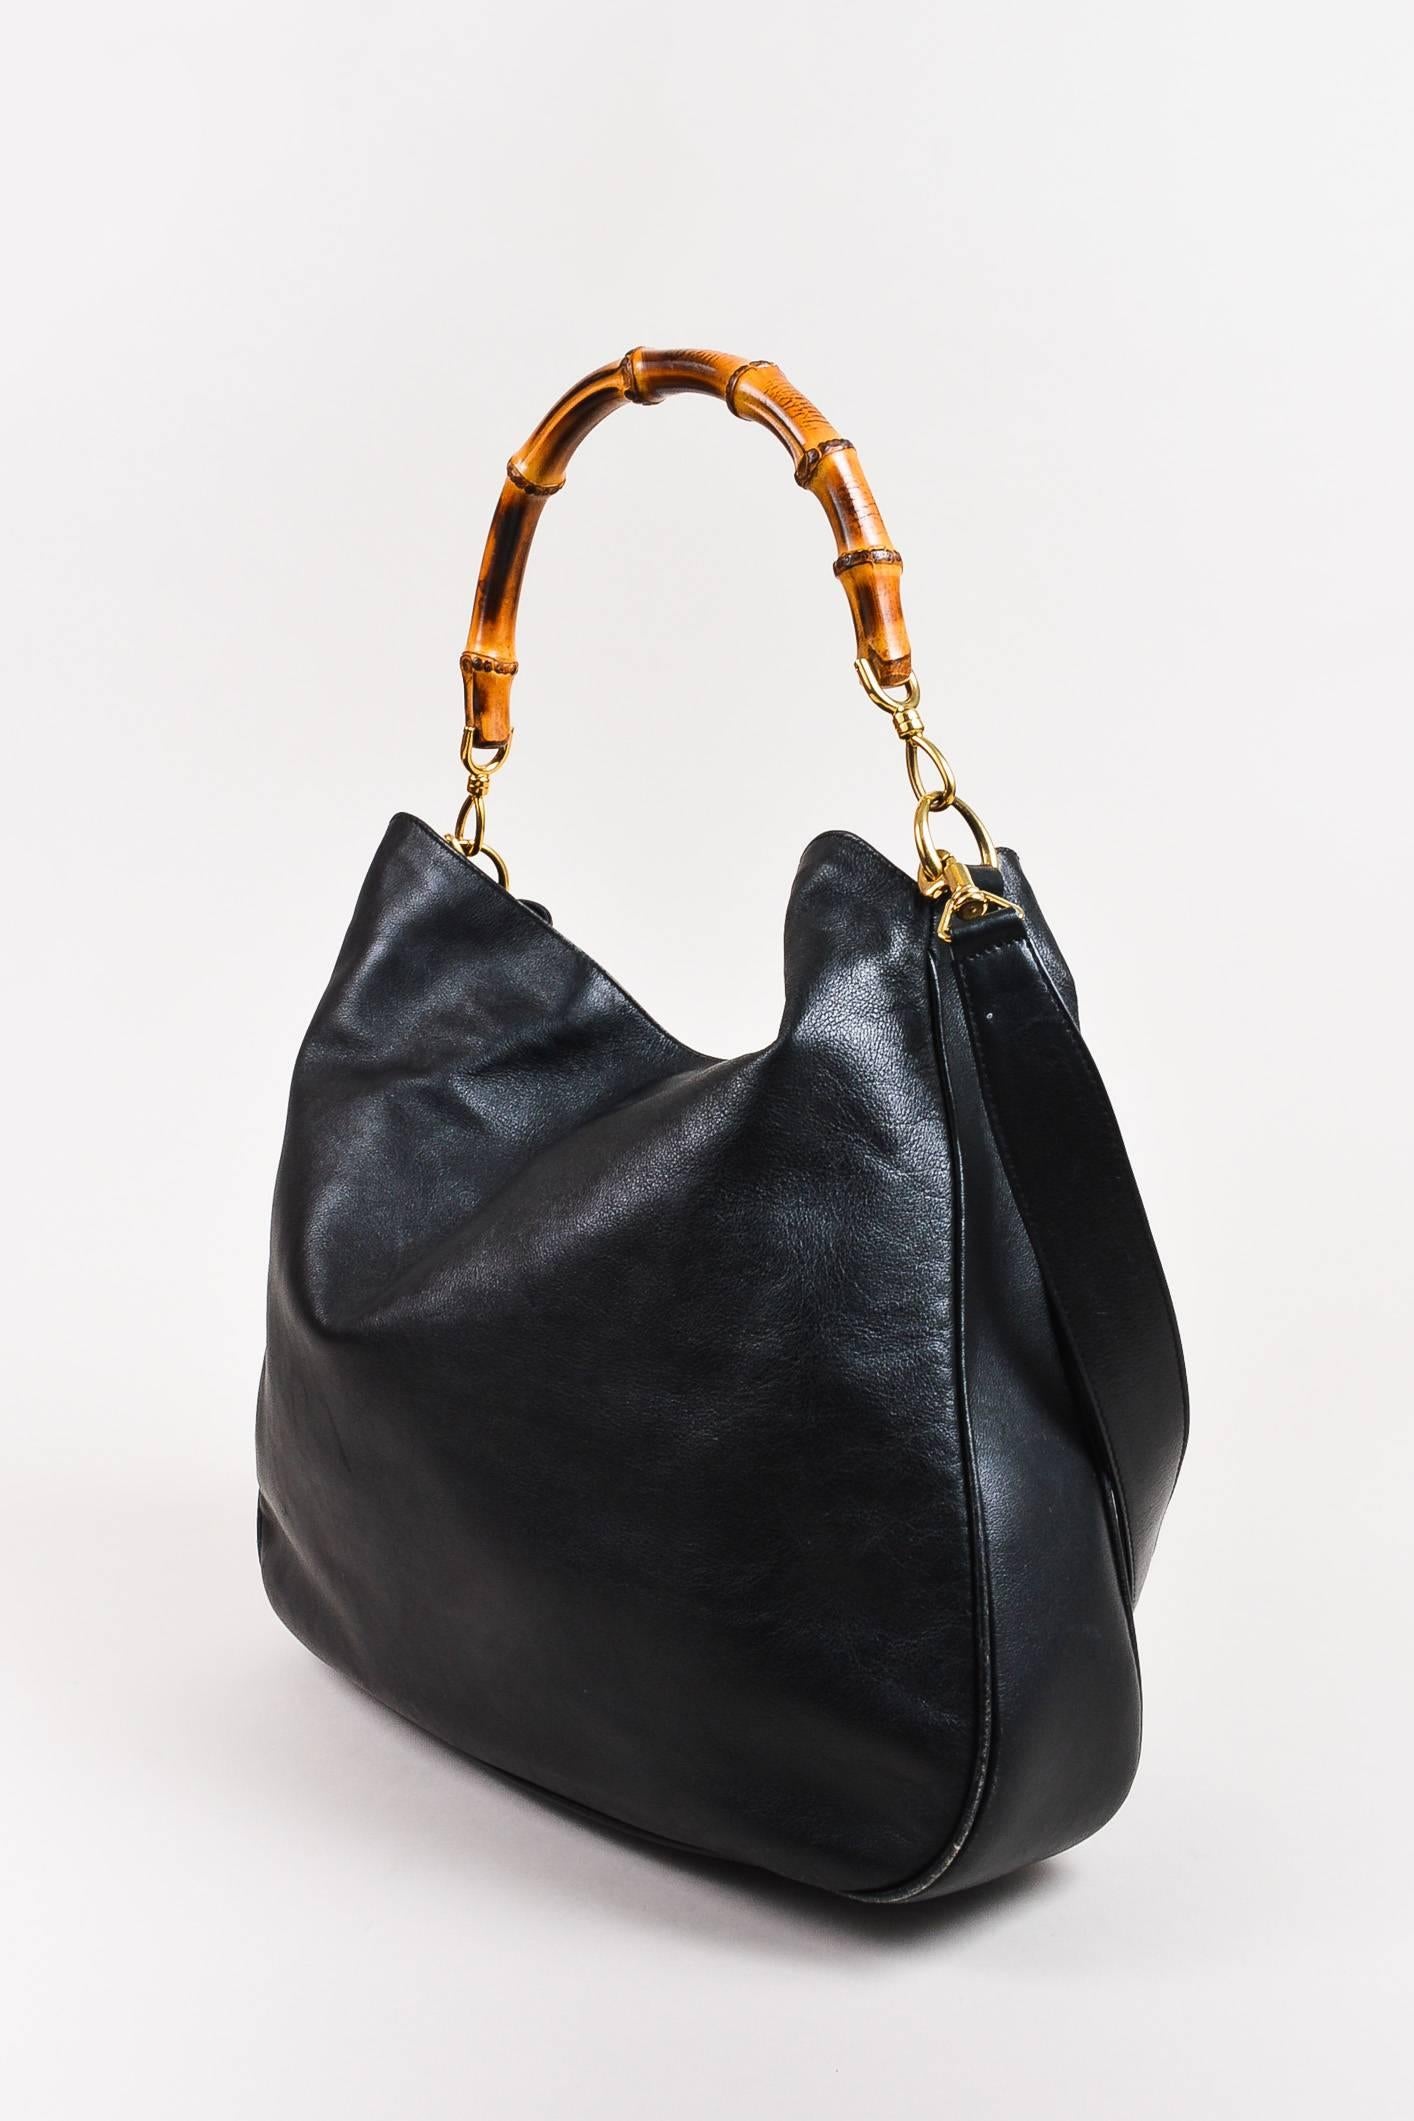 VINTAGE black leather, two-way bag by Gucci. Features a brown bamboo handle and a removable shoulder strap. Gold-tone faux lobster claws at base of both straps. Magnetic snap closure at top.

Interior features: Large zipper pocket

Additional